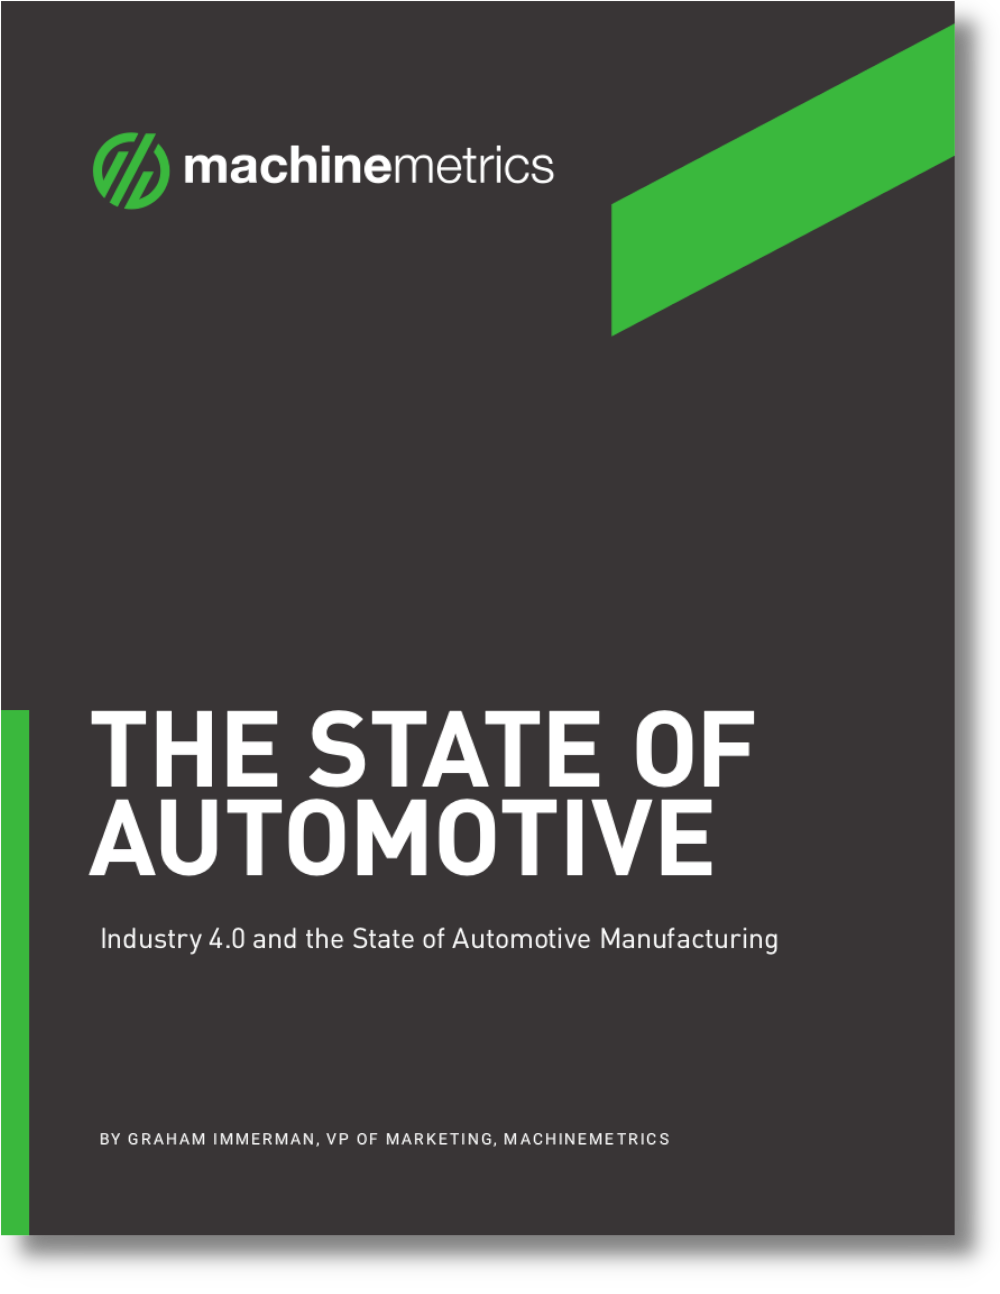 Industry 4.0 and the State of Automotive Manufacturing